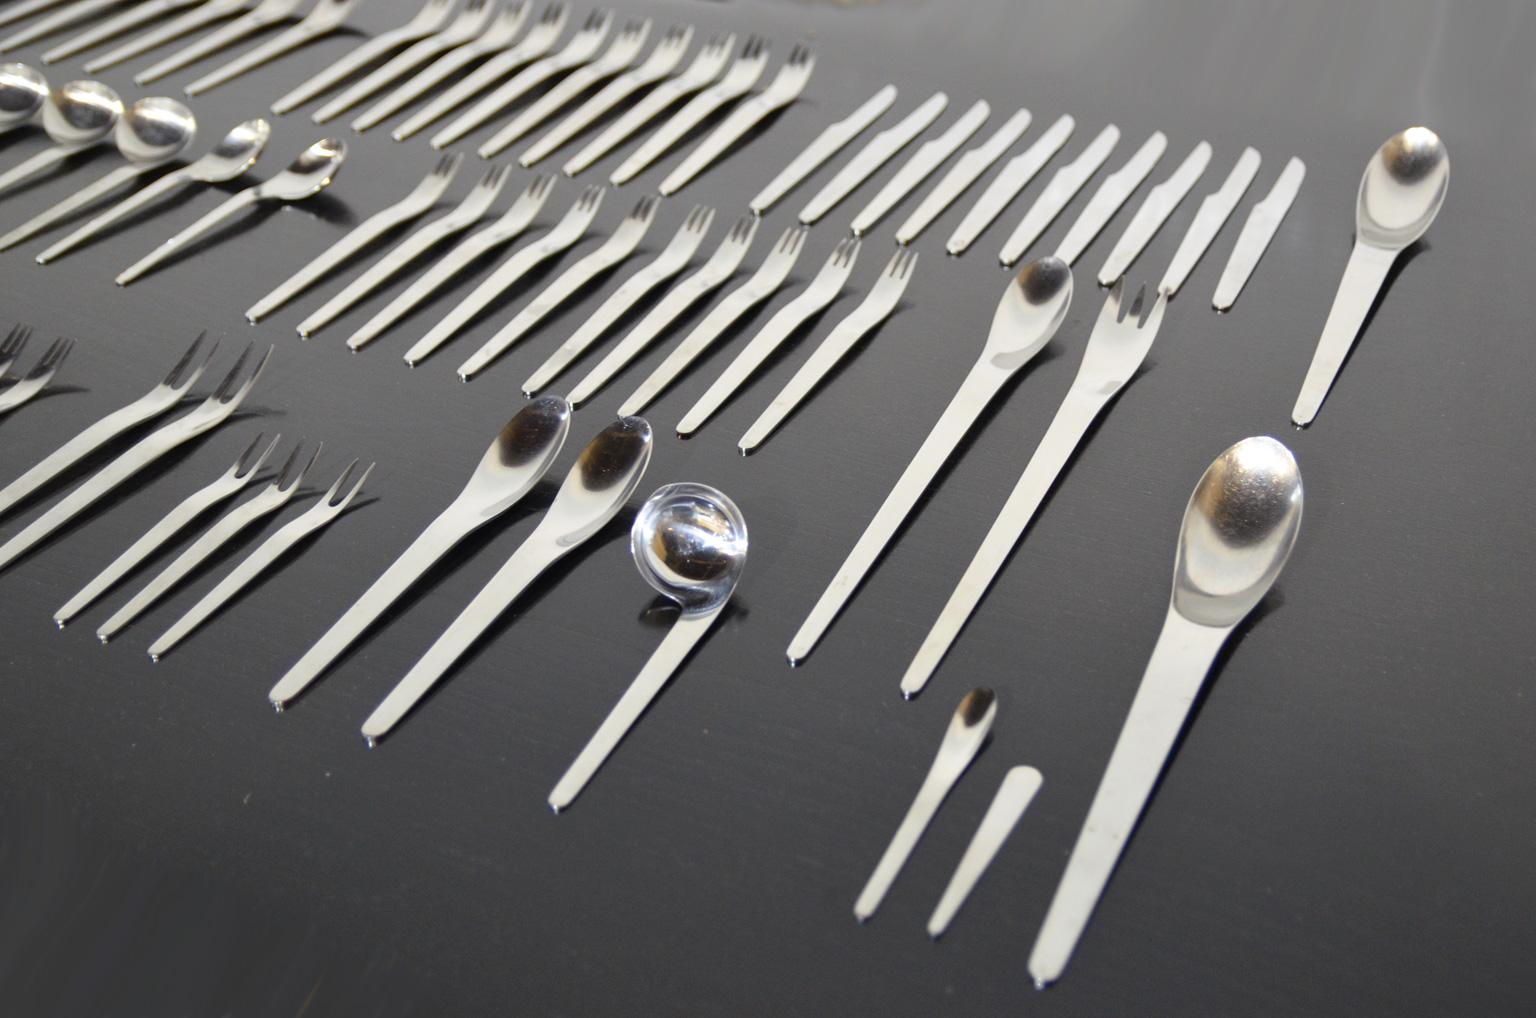 The AJ 660 flatware of stainless steel is originally designed by Arne Jacobsen amongst other house hold items for the SAS hotel in Copenhagen. This set consists of 84 pieces: 10 dinner spoons, 10 dinner forks and 10 dinner knives; 10 soup spoons (8